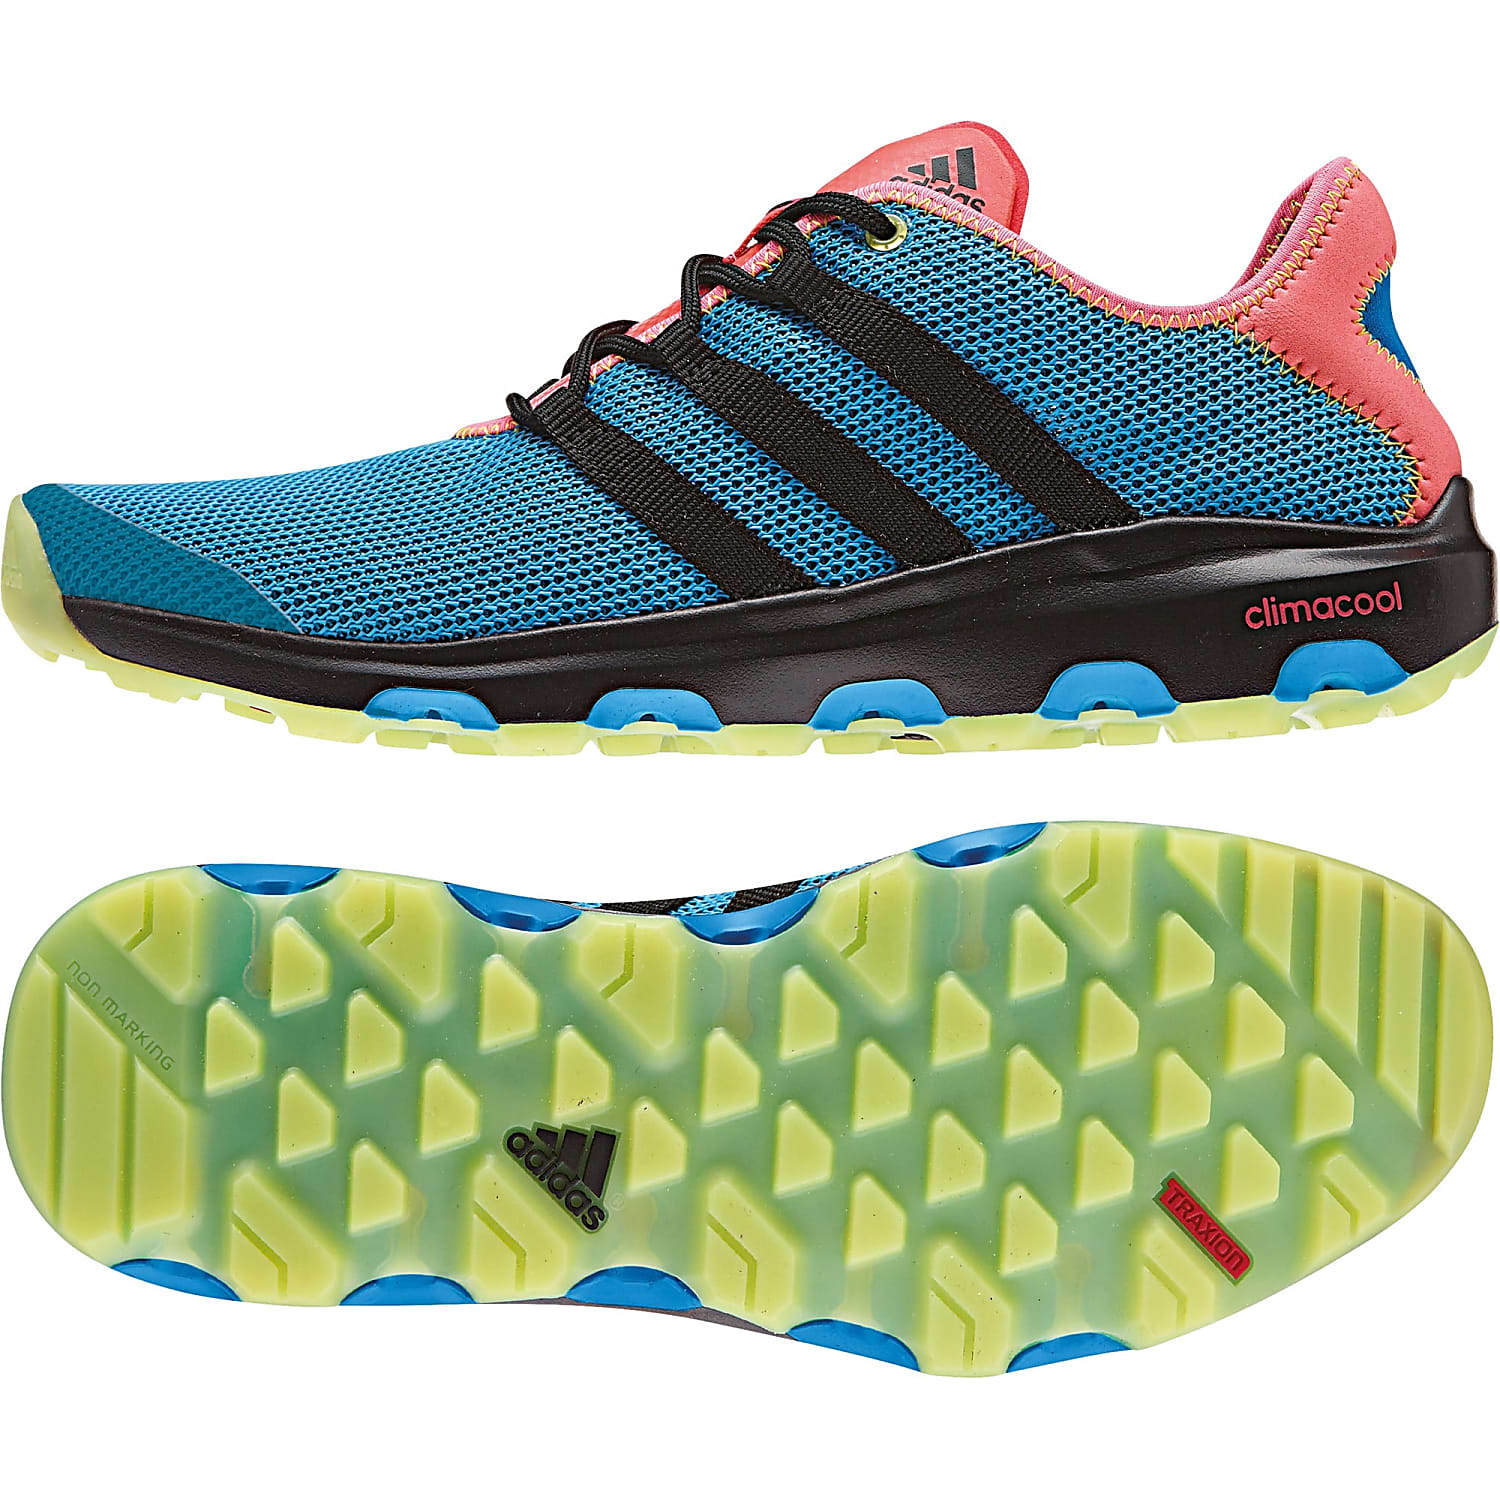 adidas voyager climacool